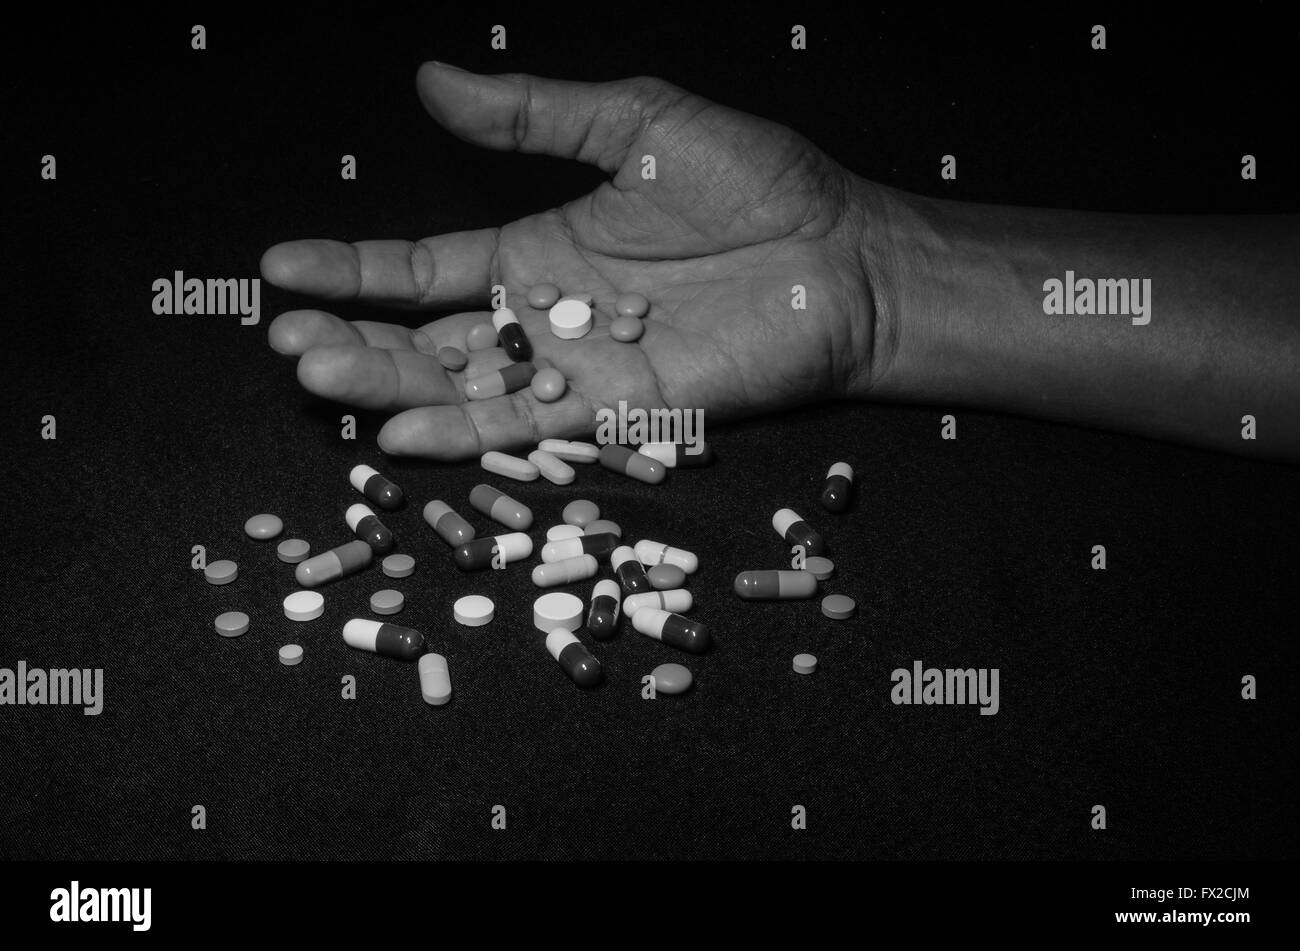 Still Life whit pills in hand Banque D'Images